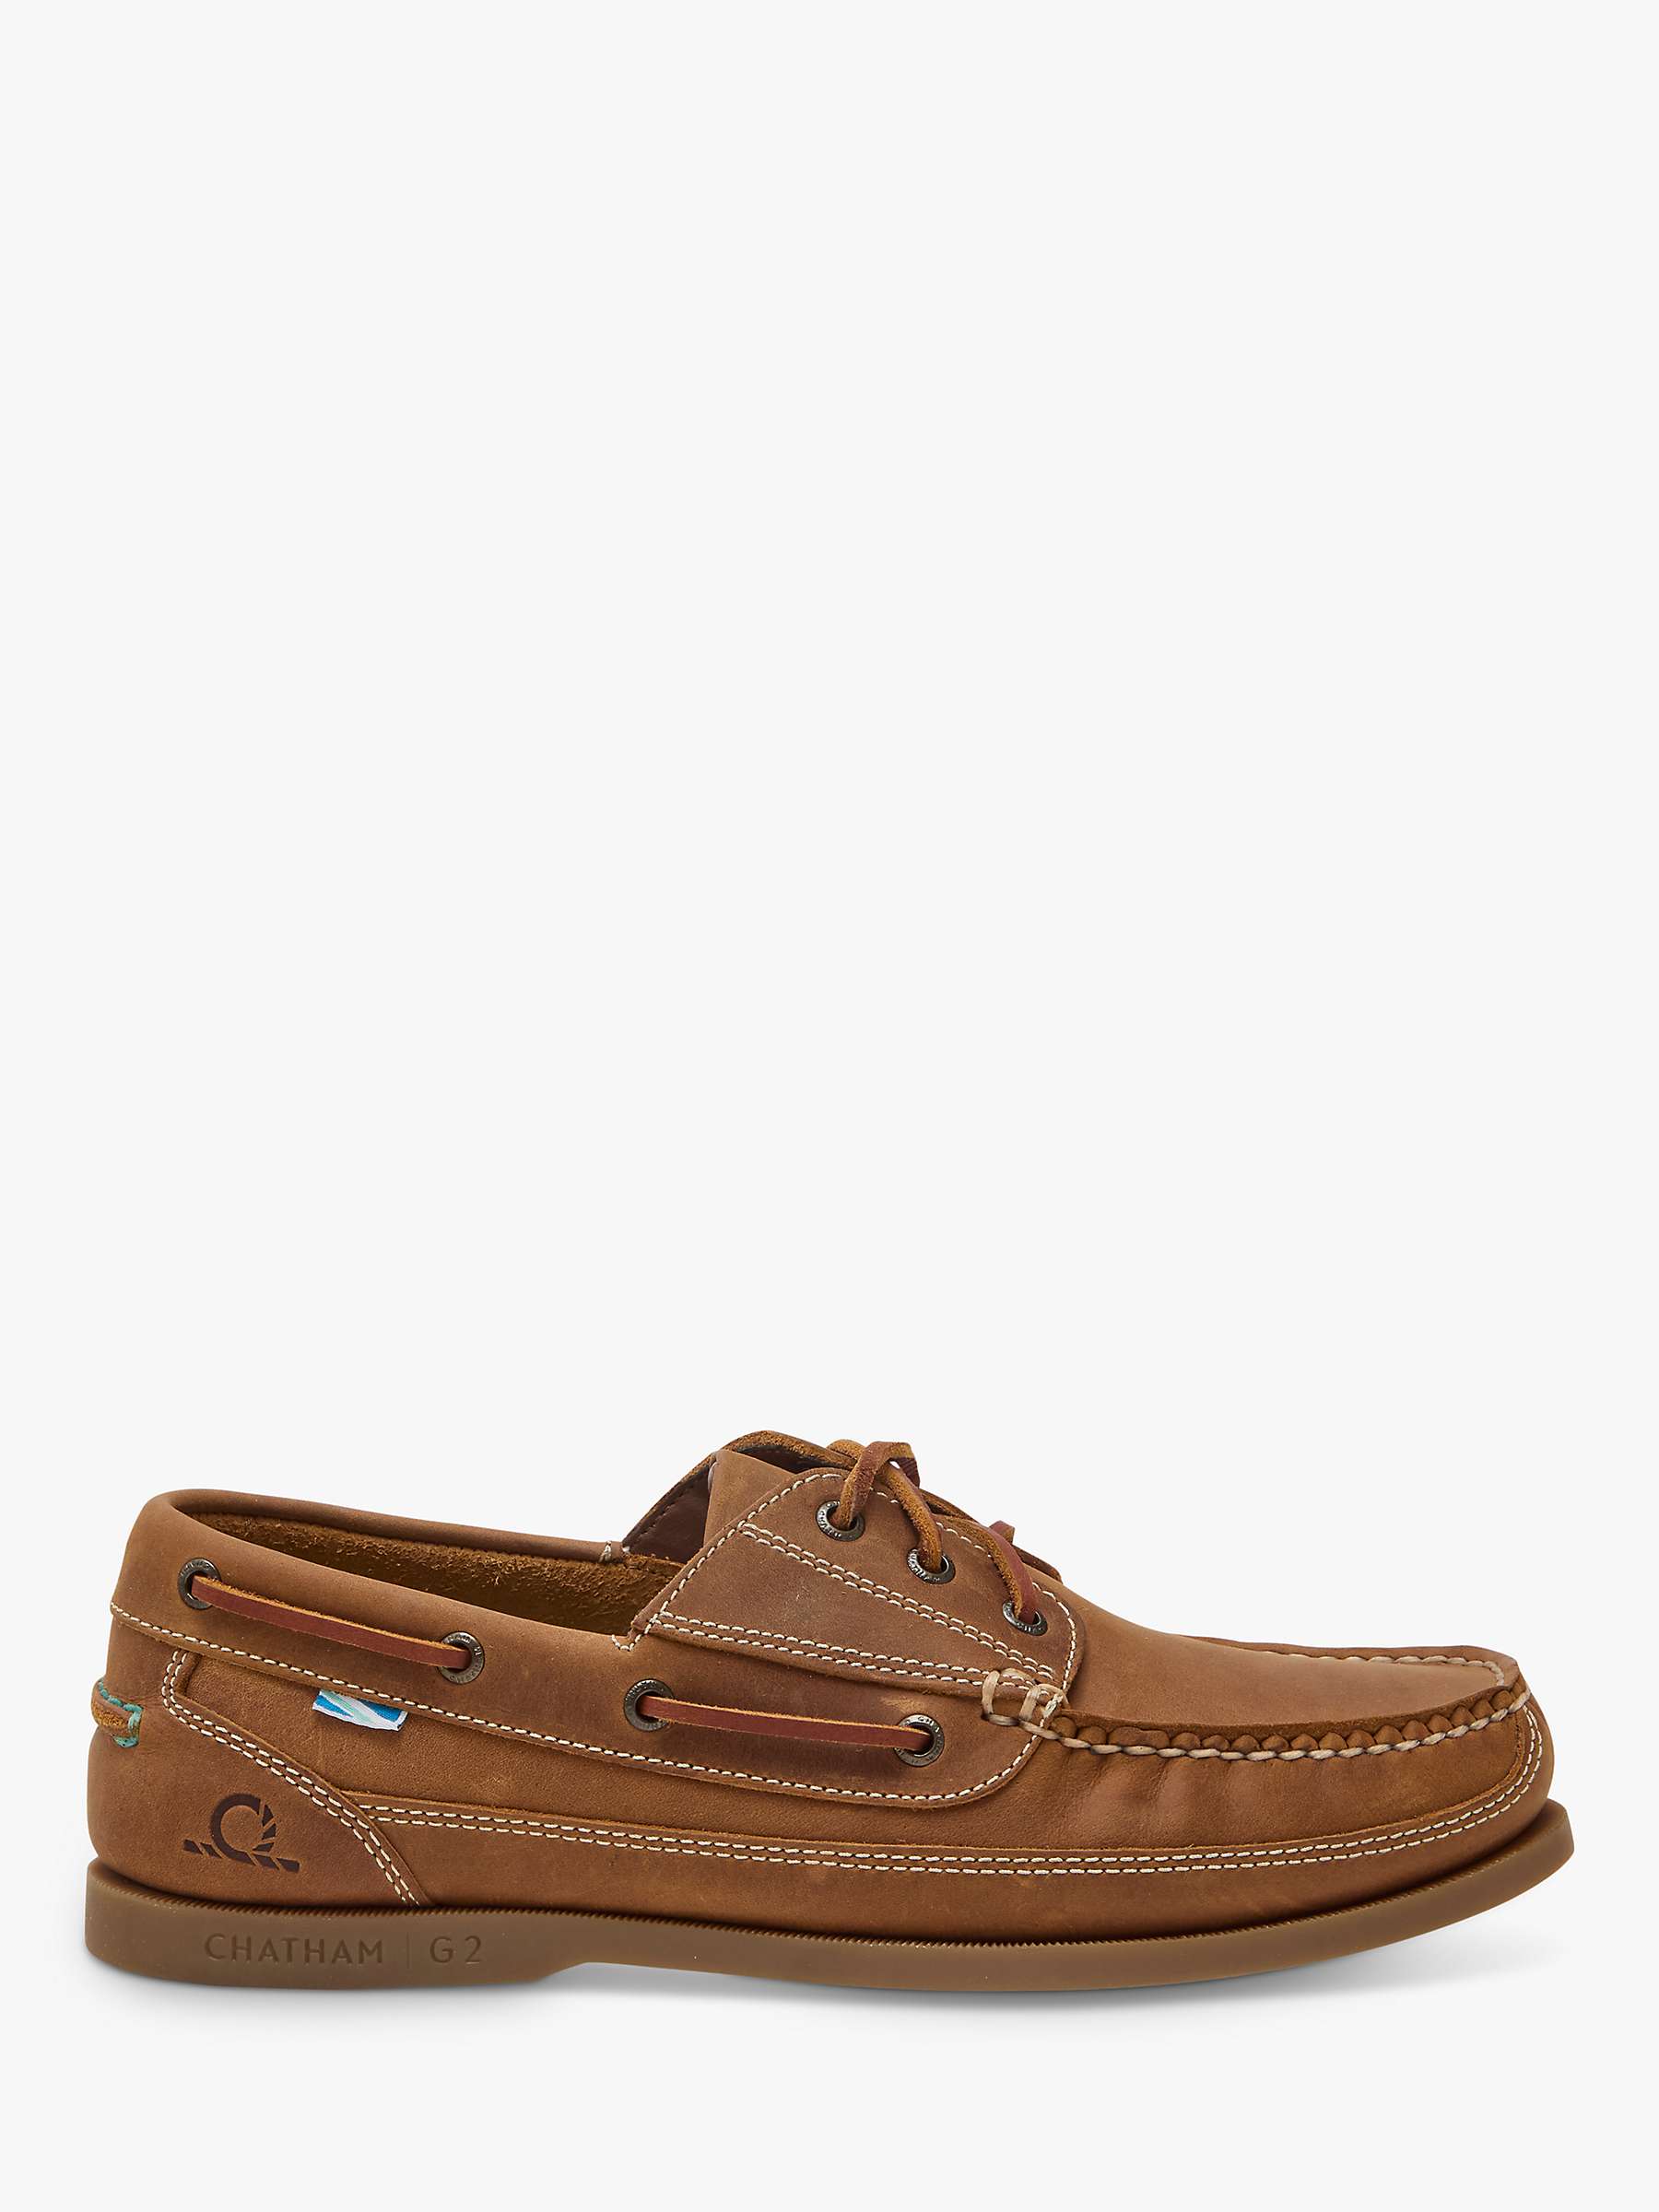 Buy Chatham Rockwell II G2 Leather Boat Shoes Online at johnlewis.com